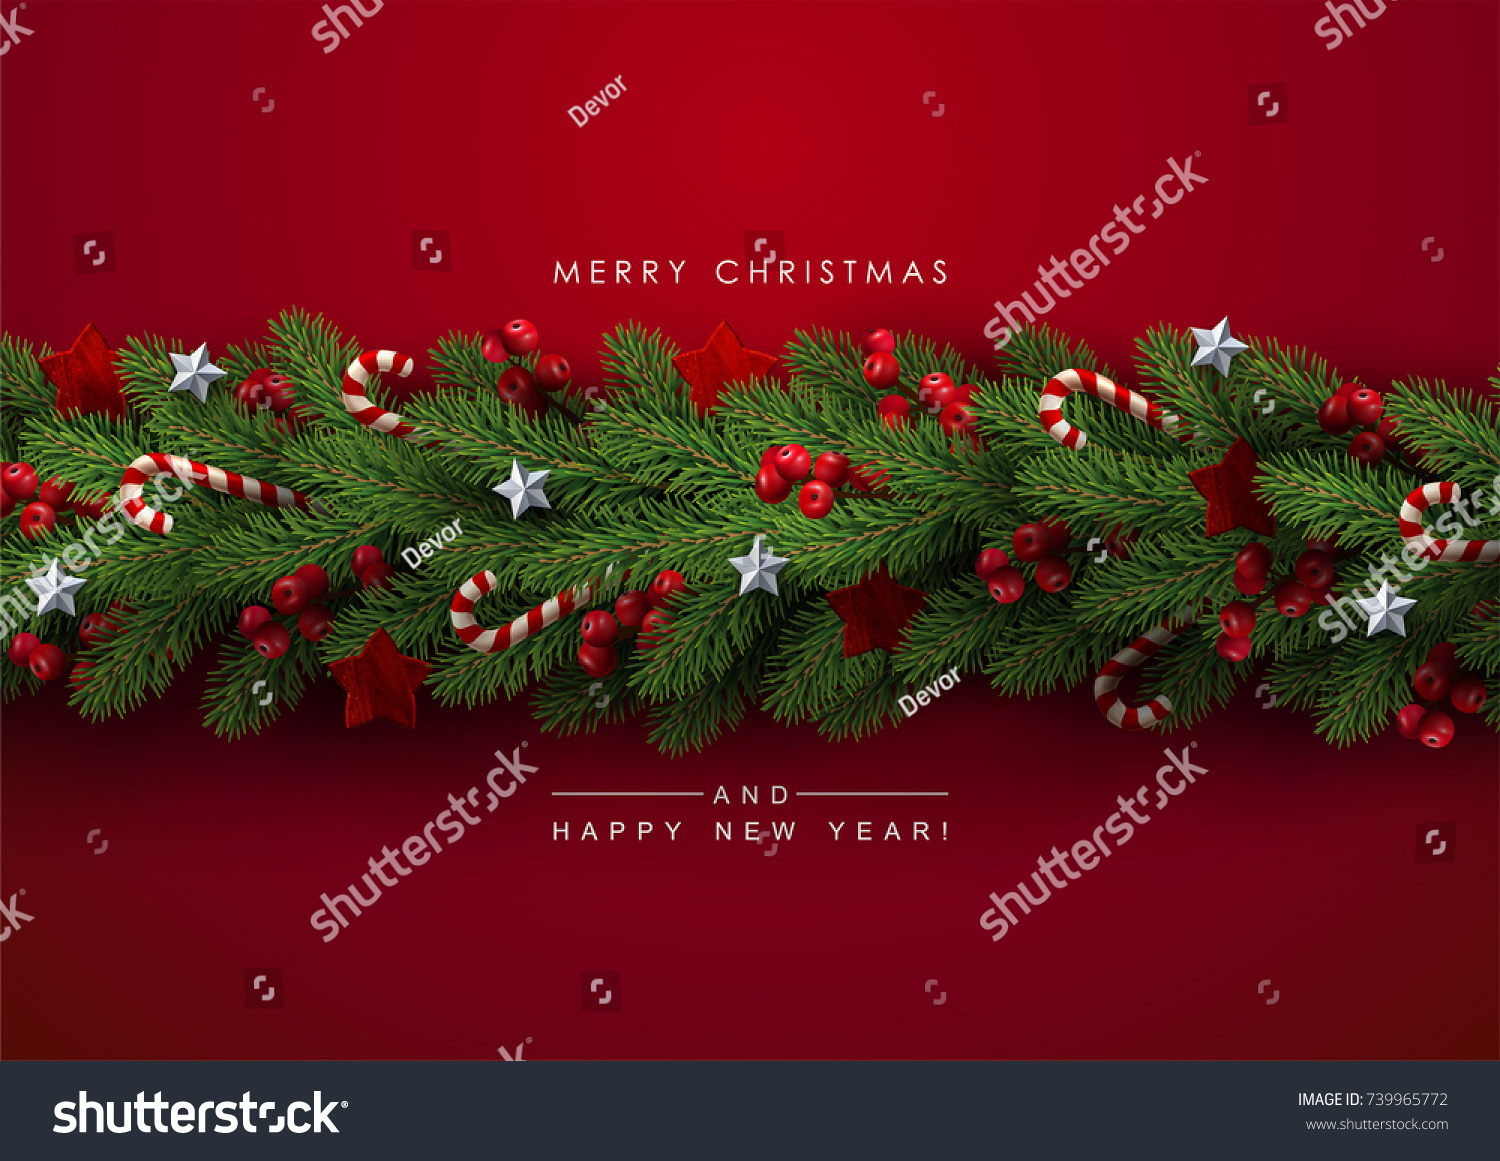 Holiday's Background with Season Wishes and Border of Realistic Looking Christmas Tree Branches Decorated with Berries, Stars and Candy Canes. #739965772